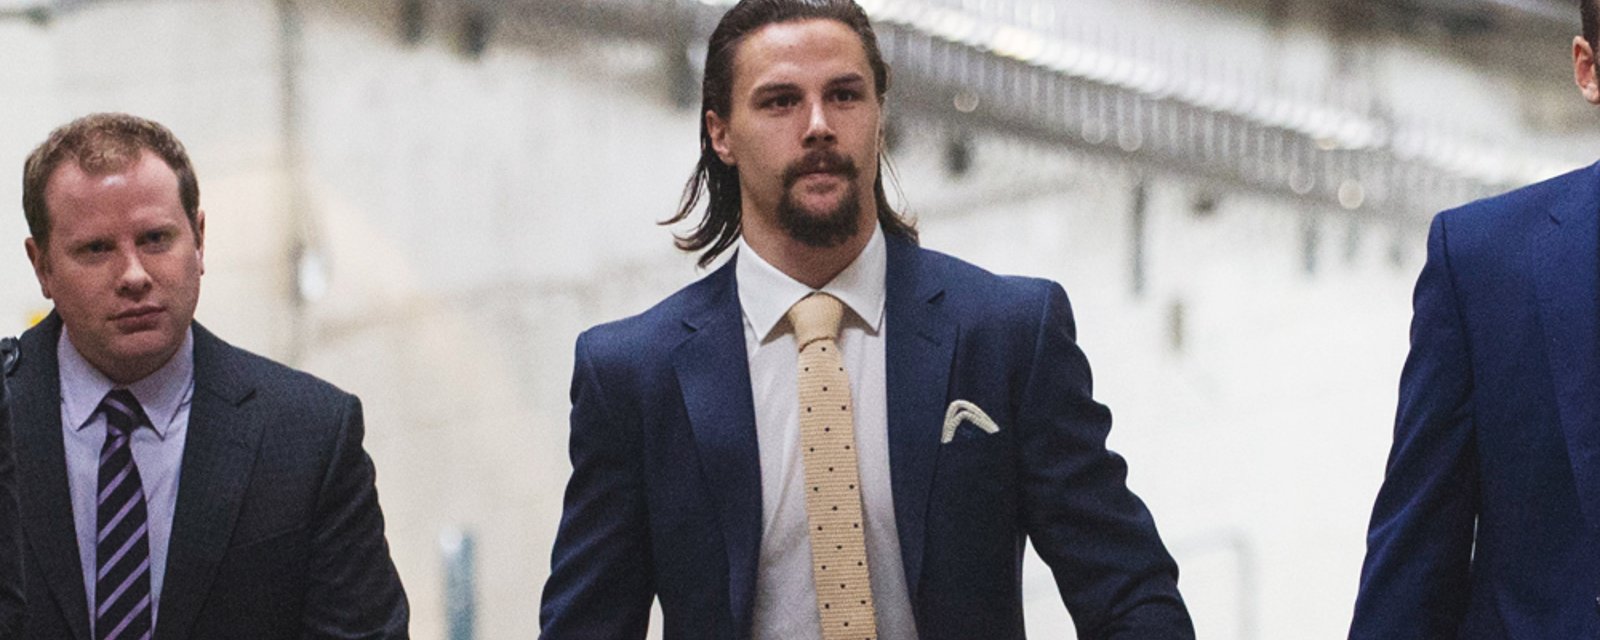 Report: Erik Karlsson spotted chatting with rival player after game.